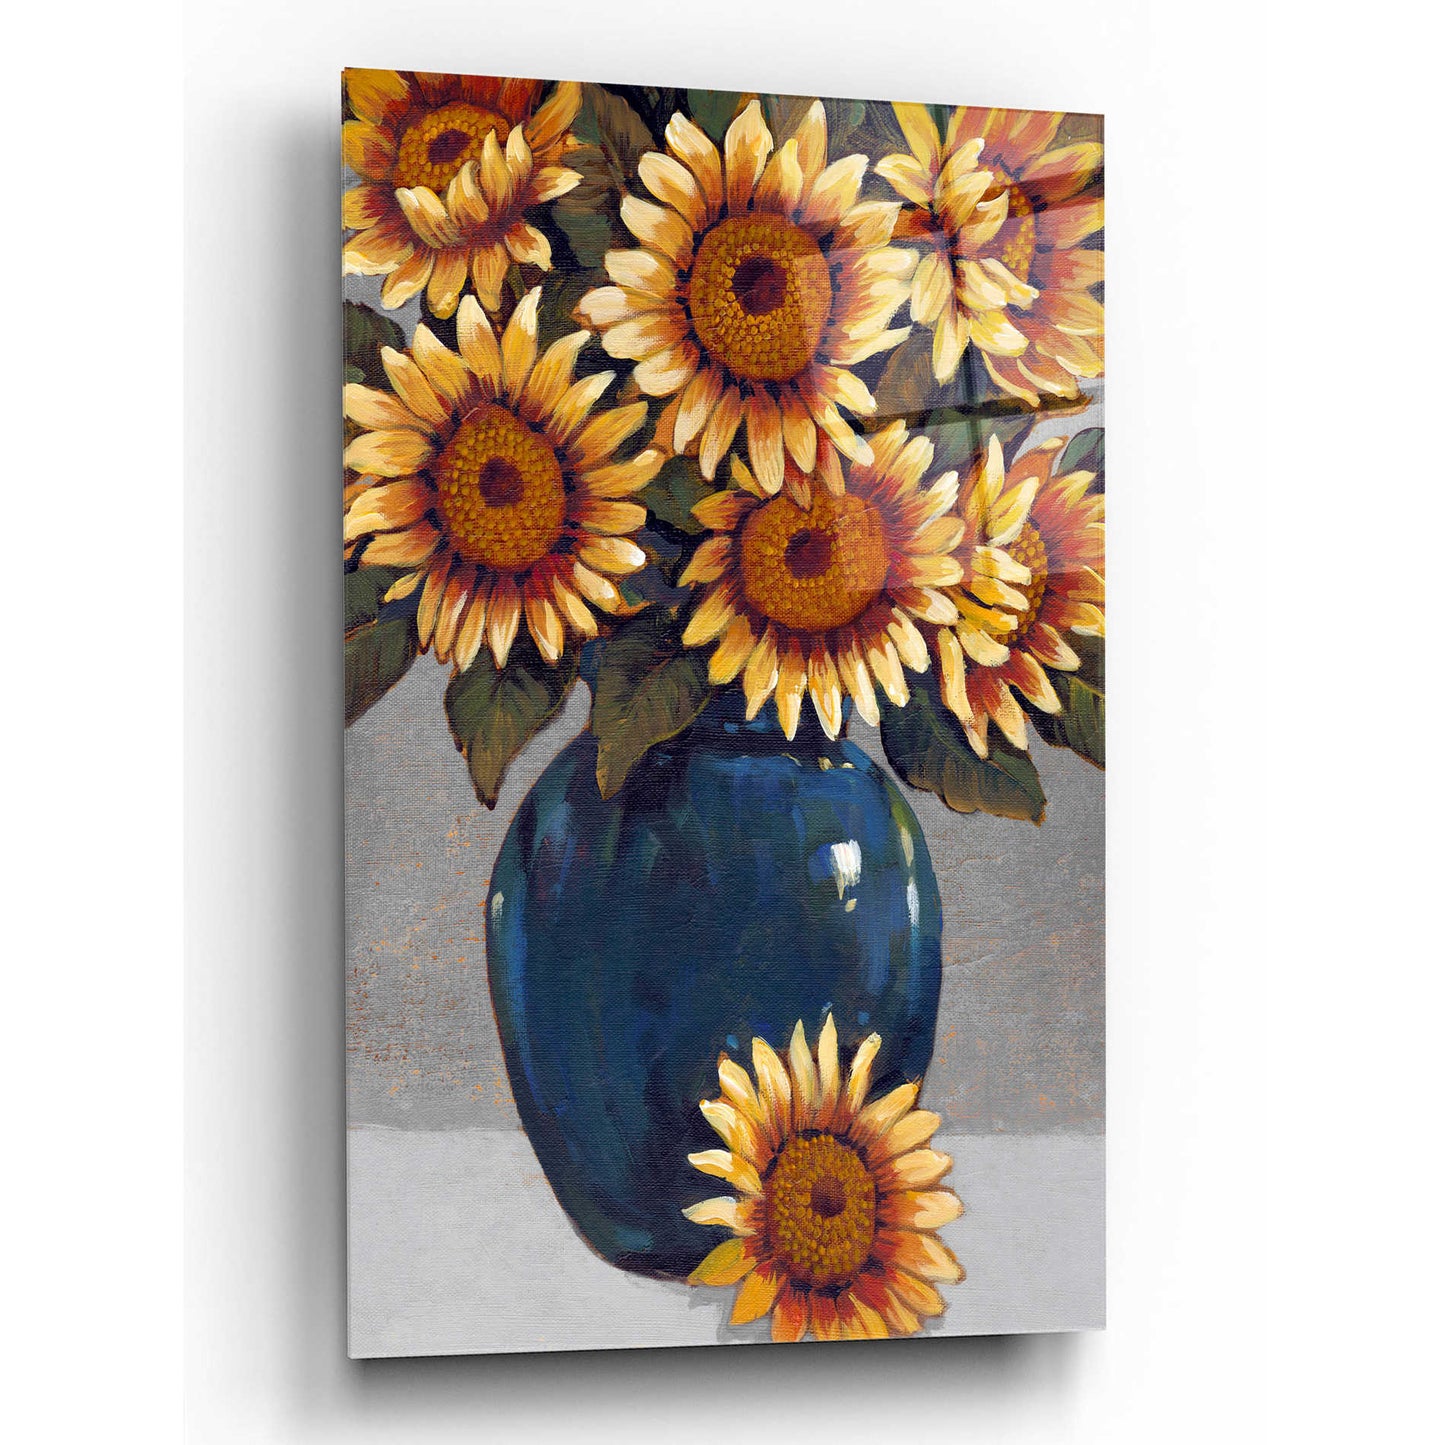 Epic Art 'Vase of Sunflowers I' by Tim O'Toole, Acrylic Glass Wall Art